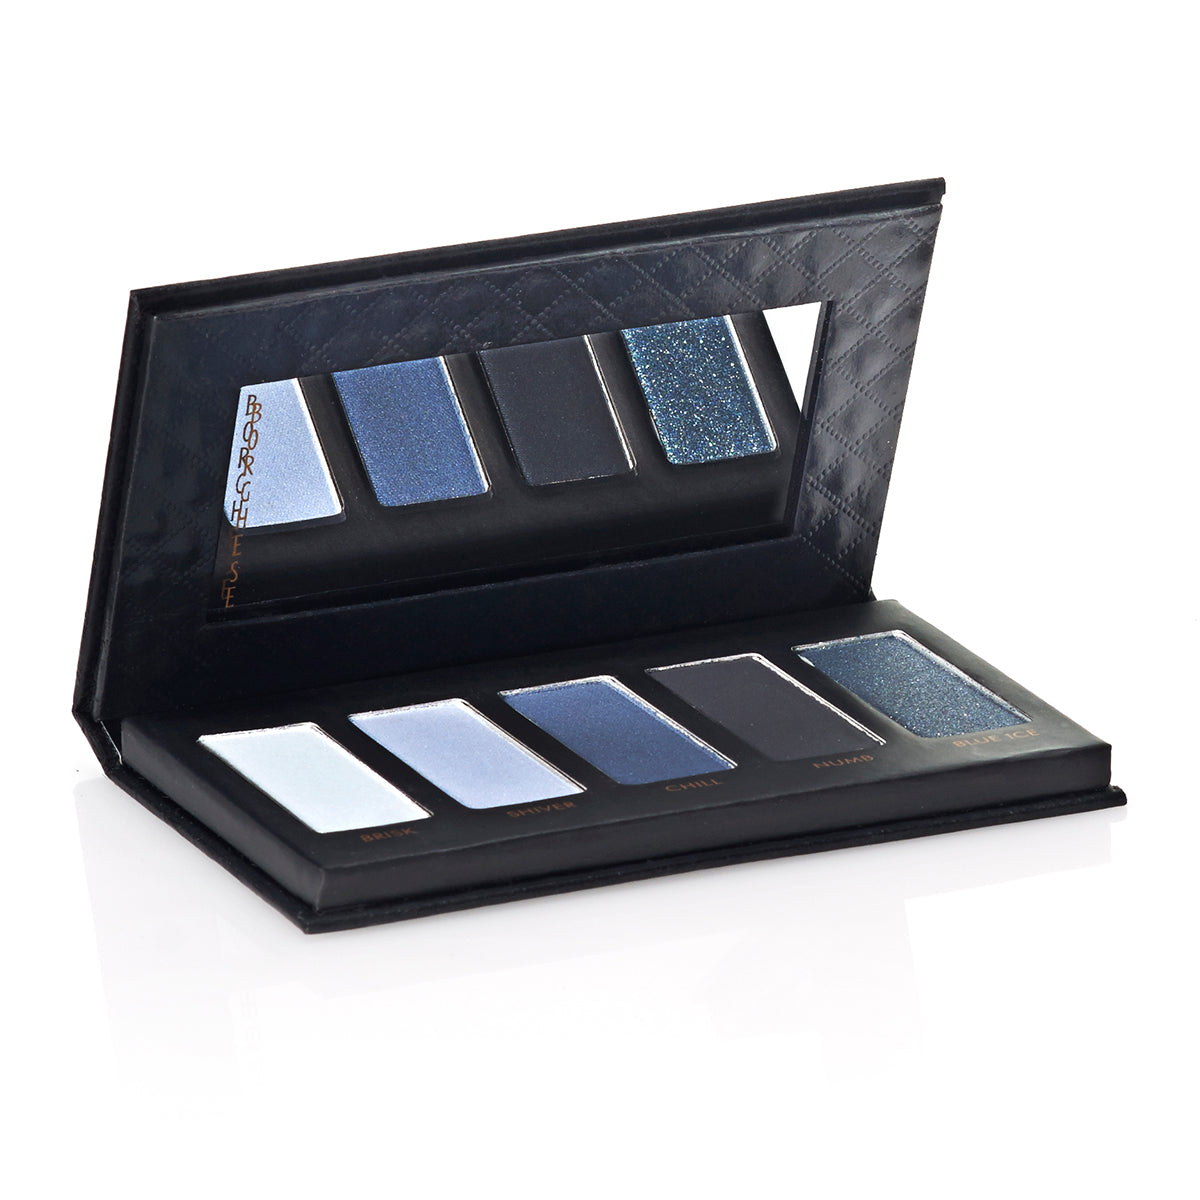 5 Shades Of Cool Eyeshadow Palette Borghese